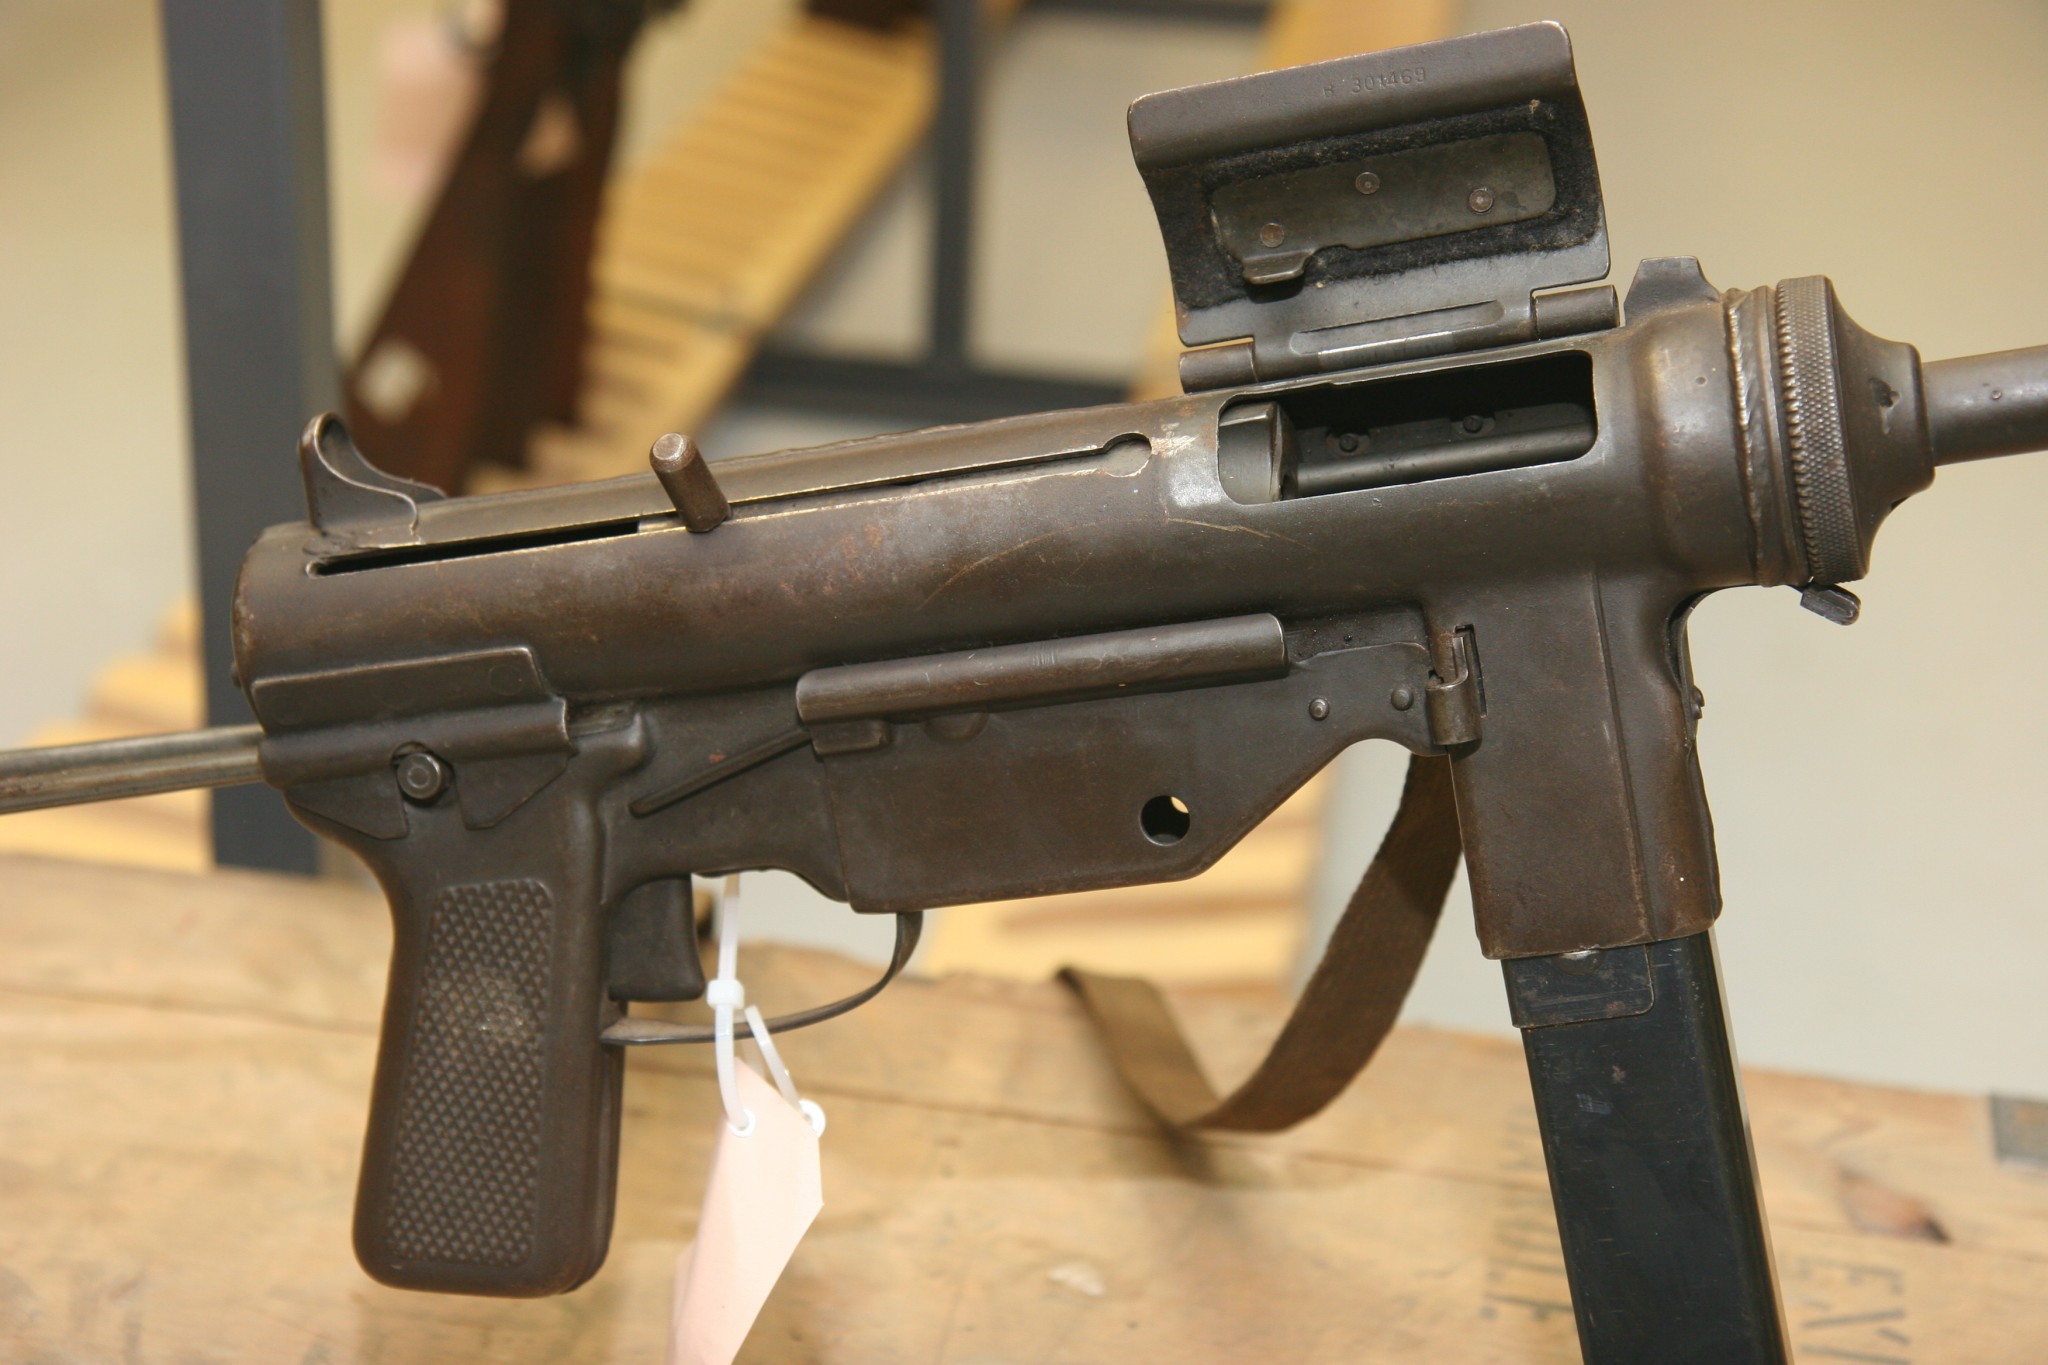 The Modified M3 Grease Gun in WWII - World War Media.